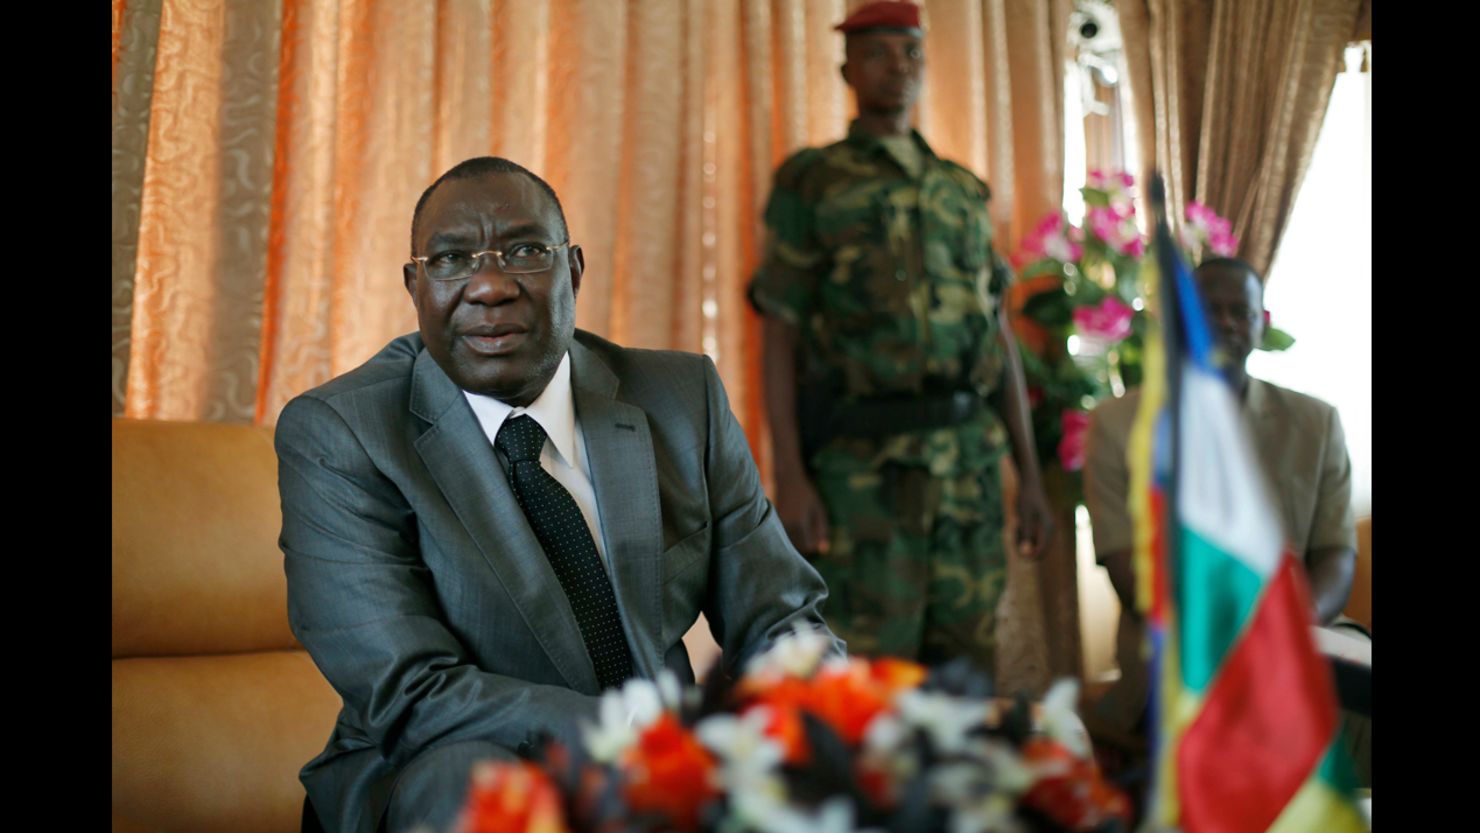 Michel Djotodia, Central African Republic's president, gives a press conference in his office in Bangui on December 8.